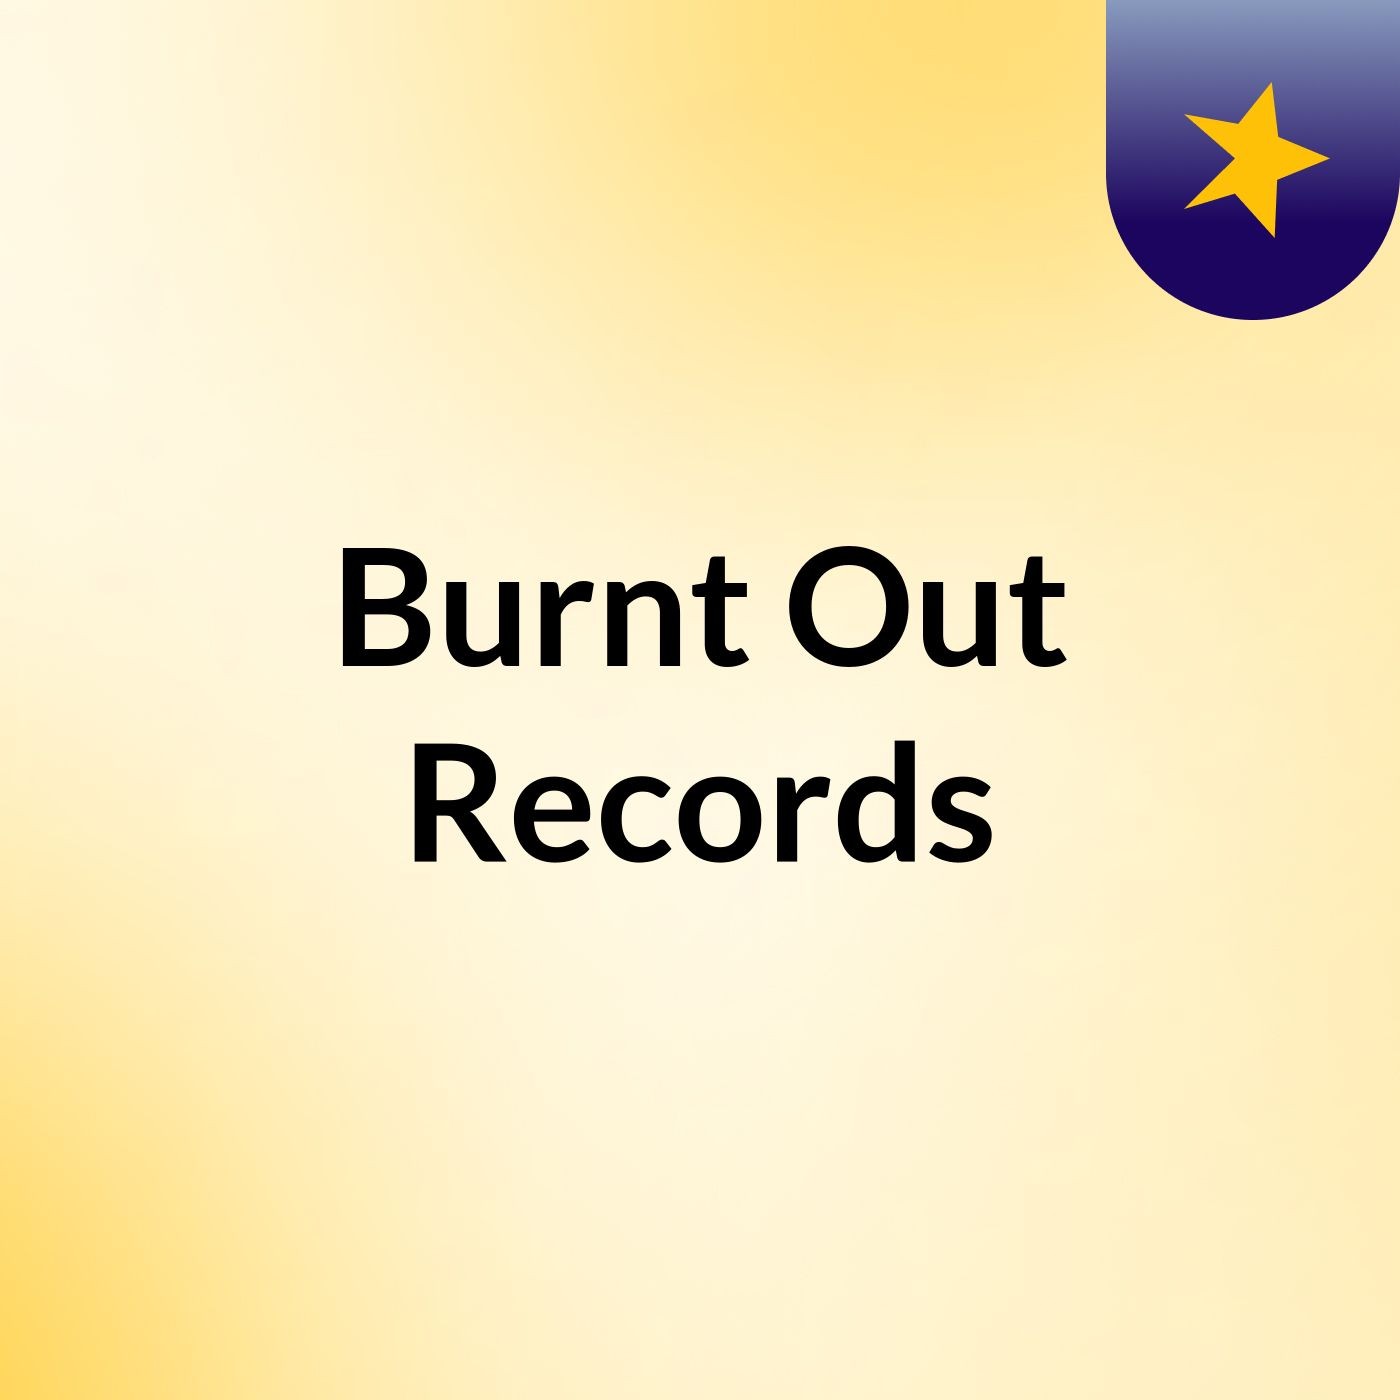 Burnt Out Records